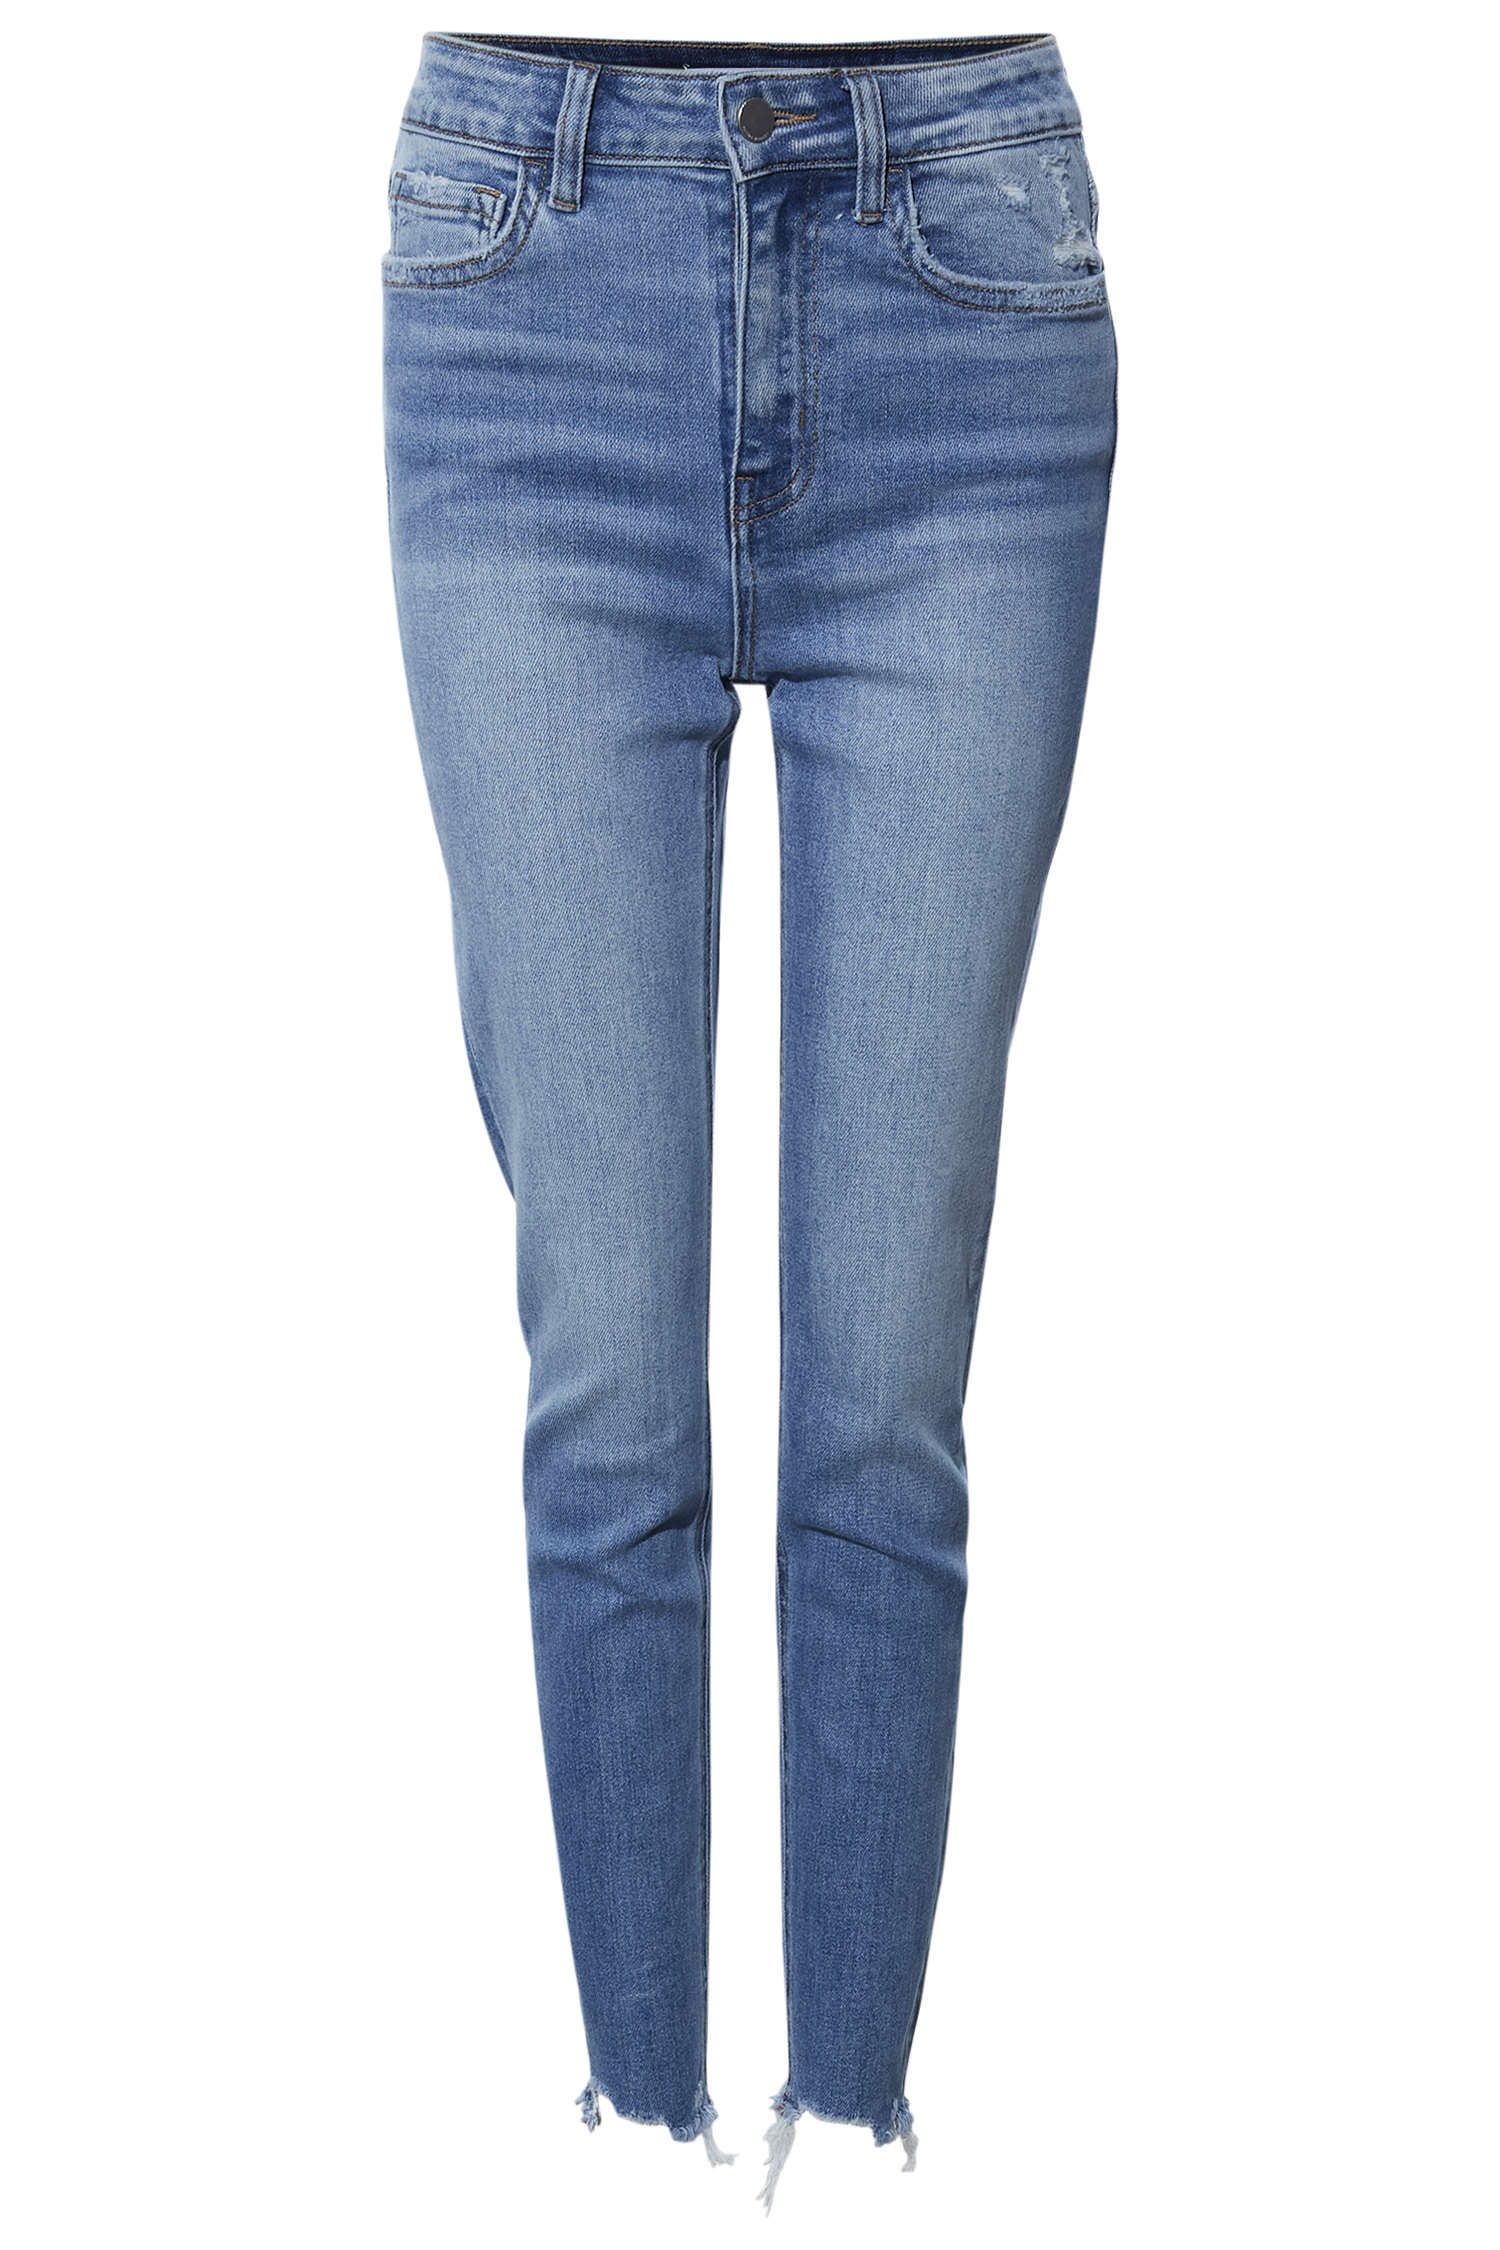 Flying Monkey High Rise Crop Ankle Jean